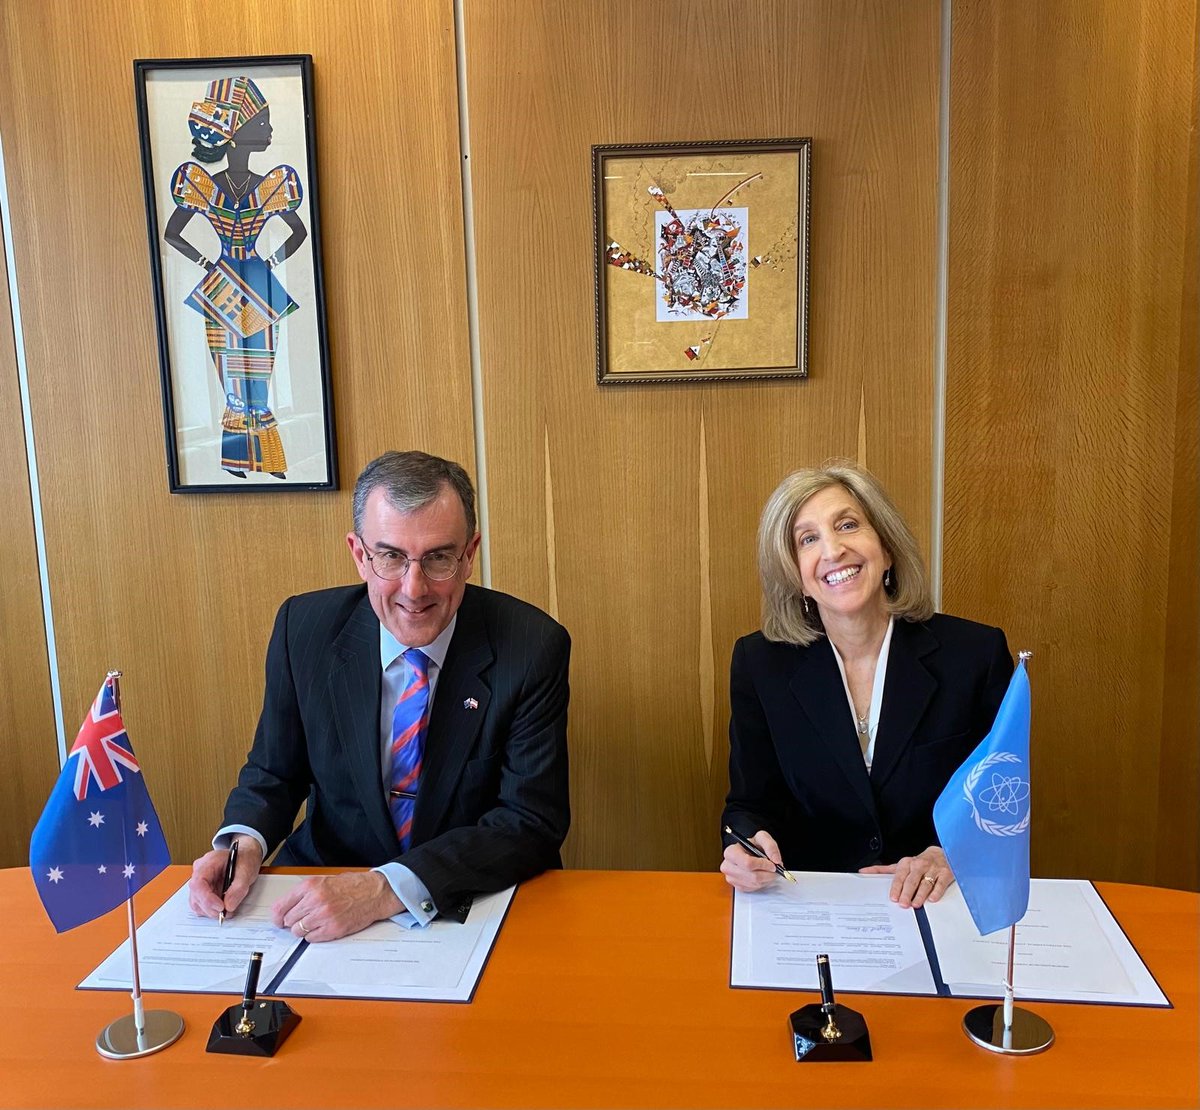 Delighted to sign a Memorandum of Understanding for Junior Professional Officers with the @iaeaorg today. Australia supports the IAEA's mission to promote the safe, secure and peaceful use of nuclear technology.